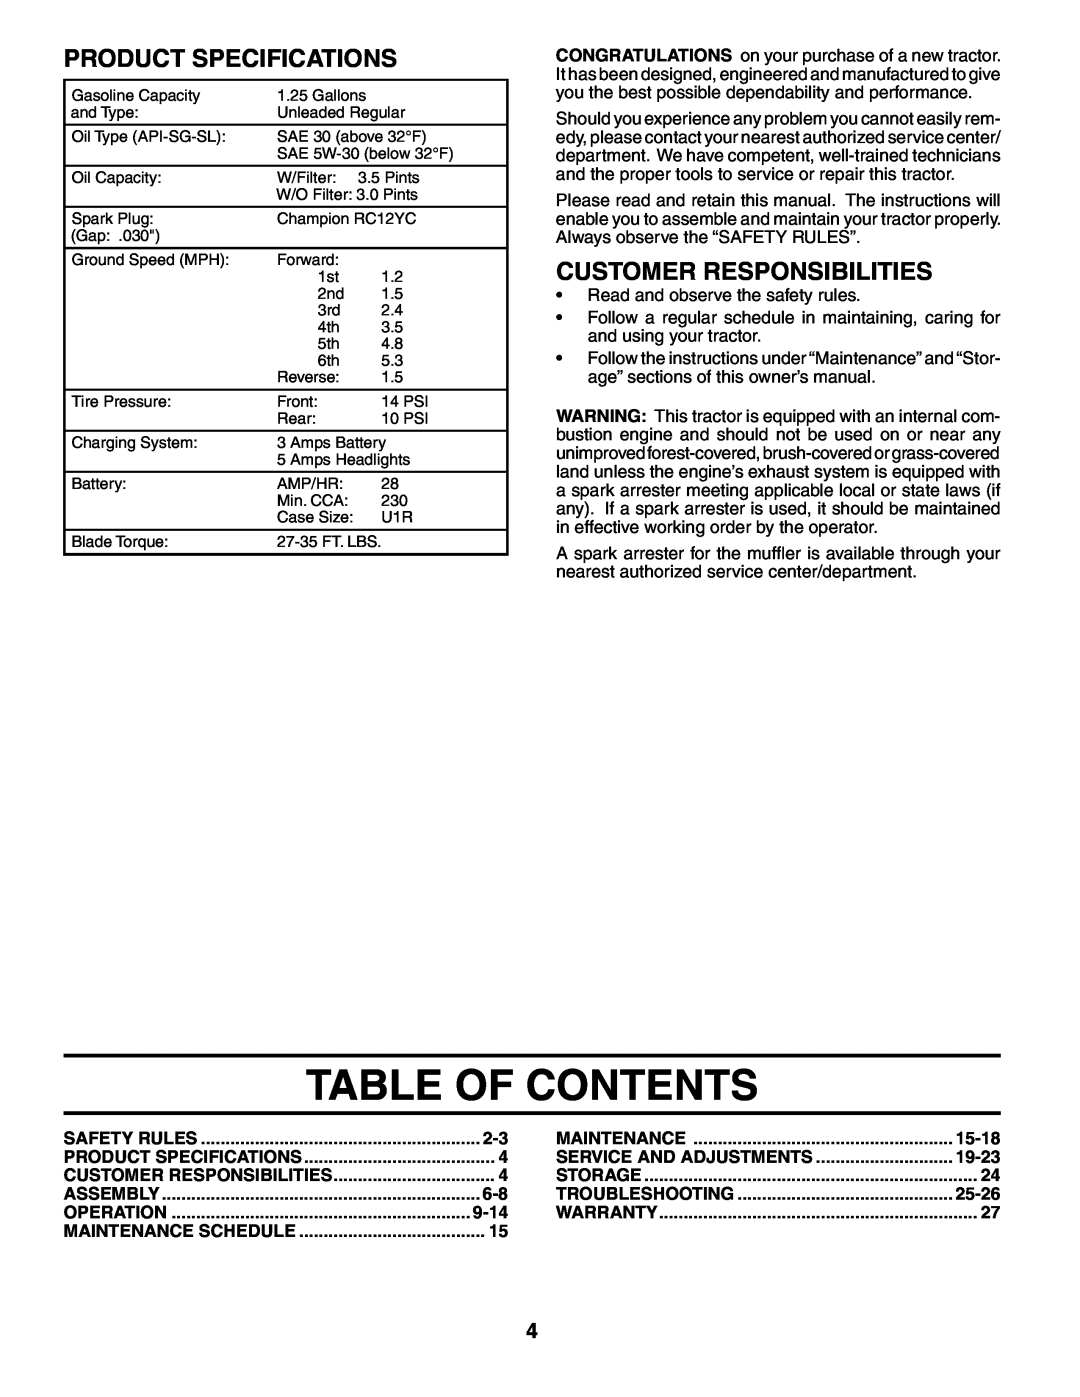 Poulan 960120003 manual Table Of Contents, Product Specifications, Customer Responsibilities 